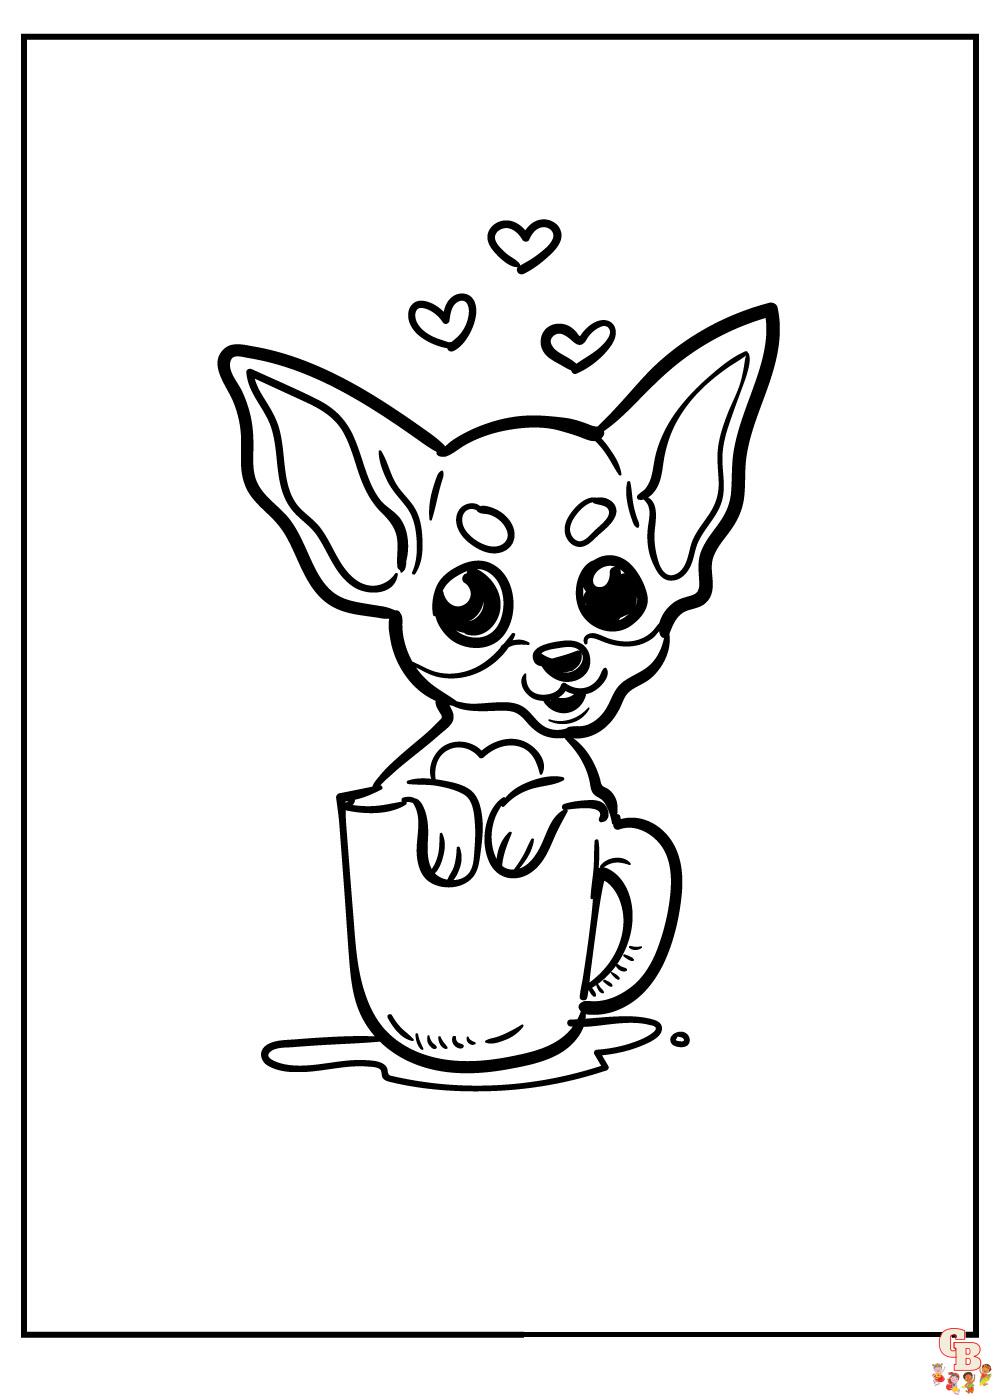 Pomeranian and Chihuahua Coloring Pages 3